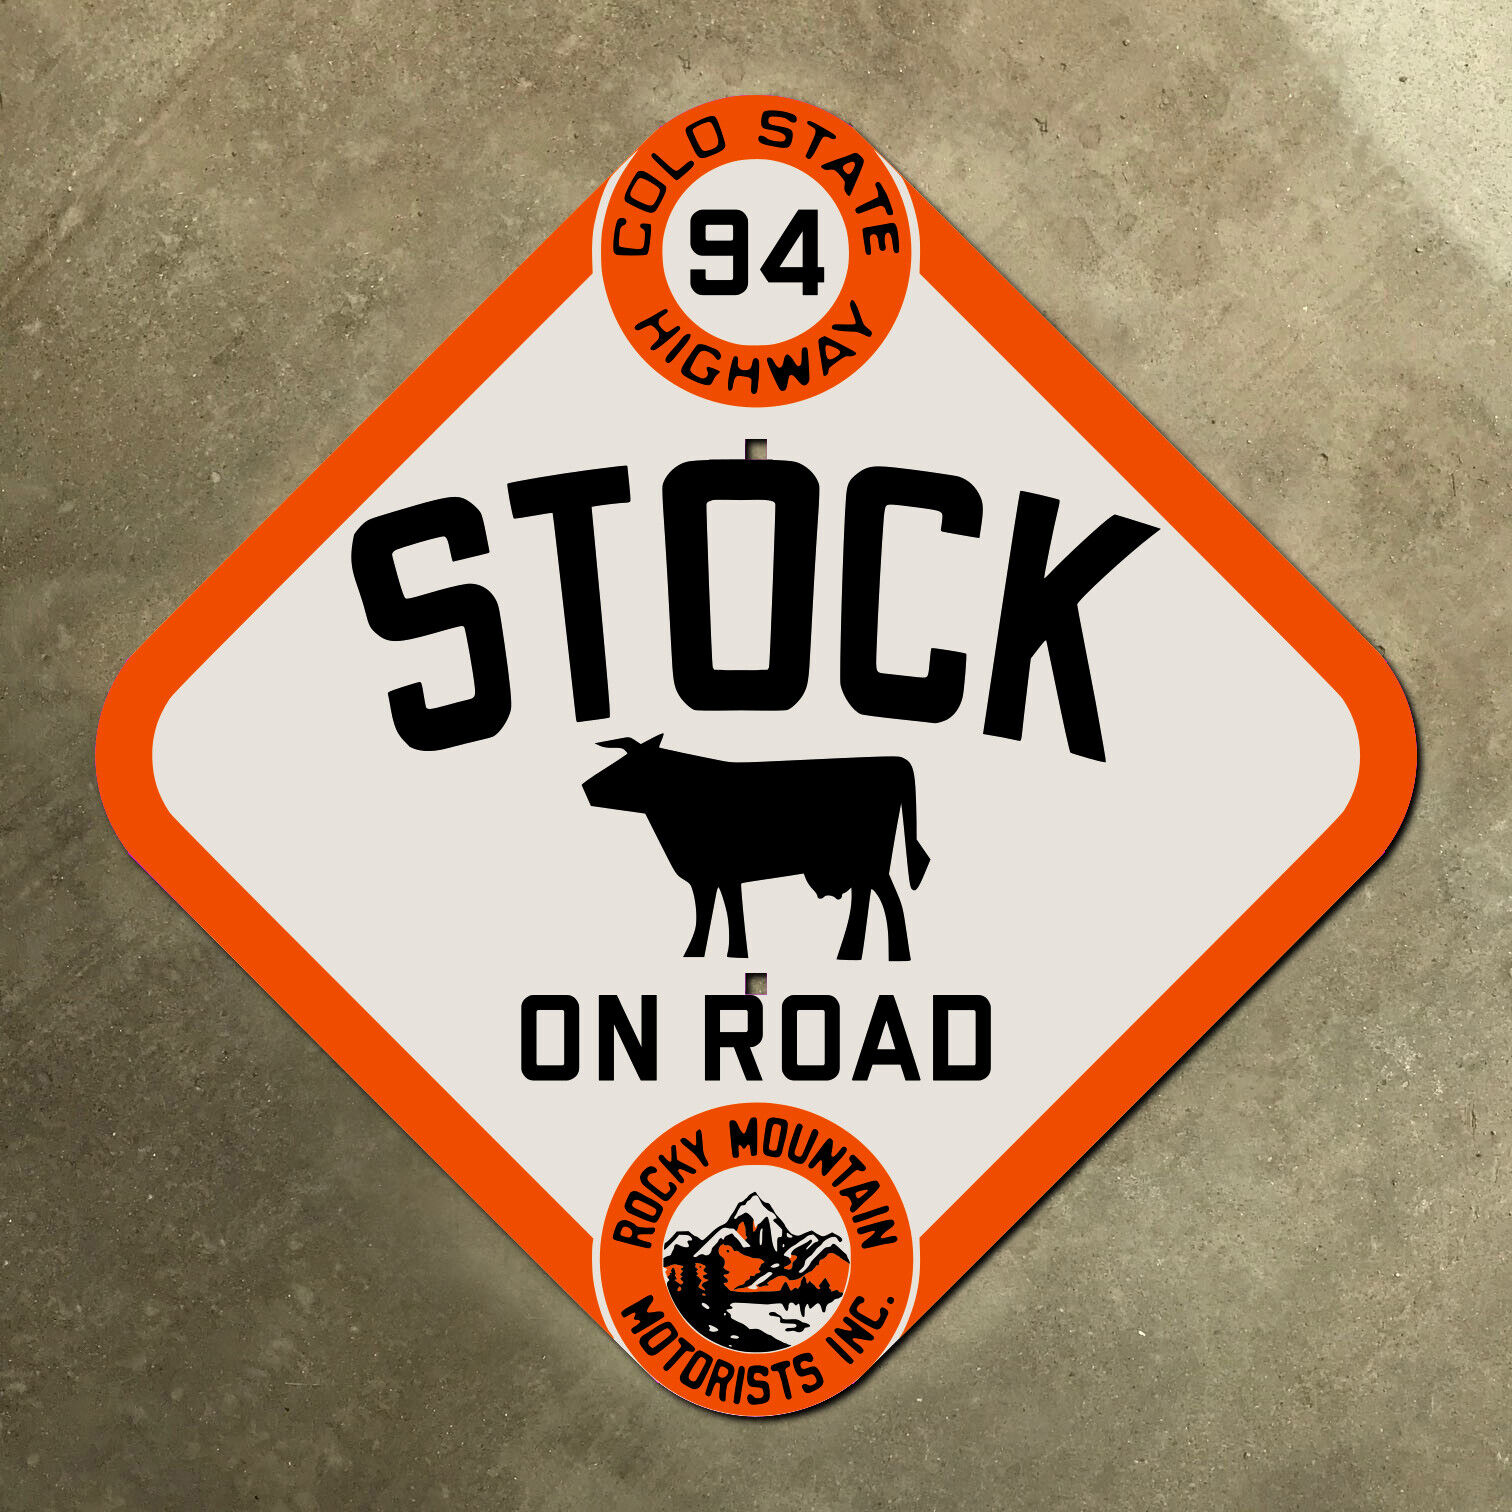 Colorado Rocky Mountain Motorists state highway 94 stock warning road sign cow